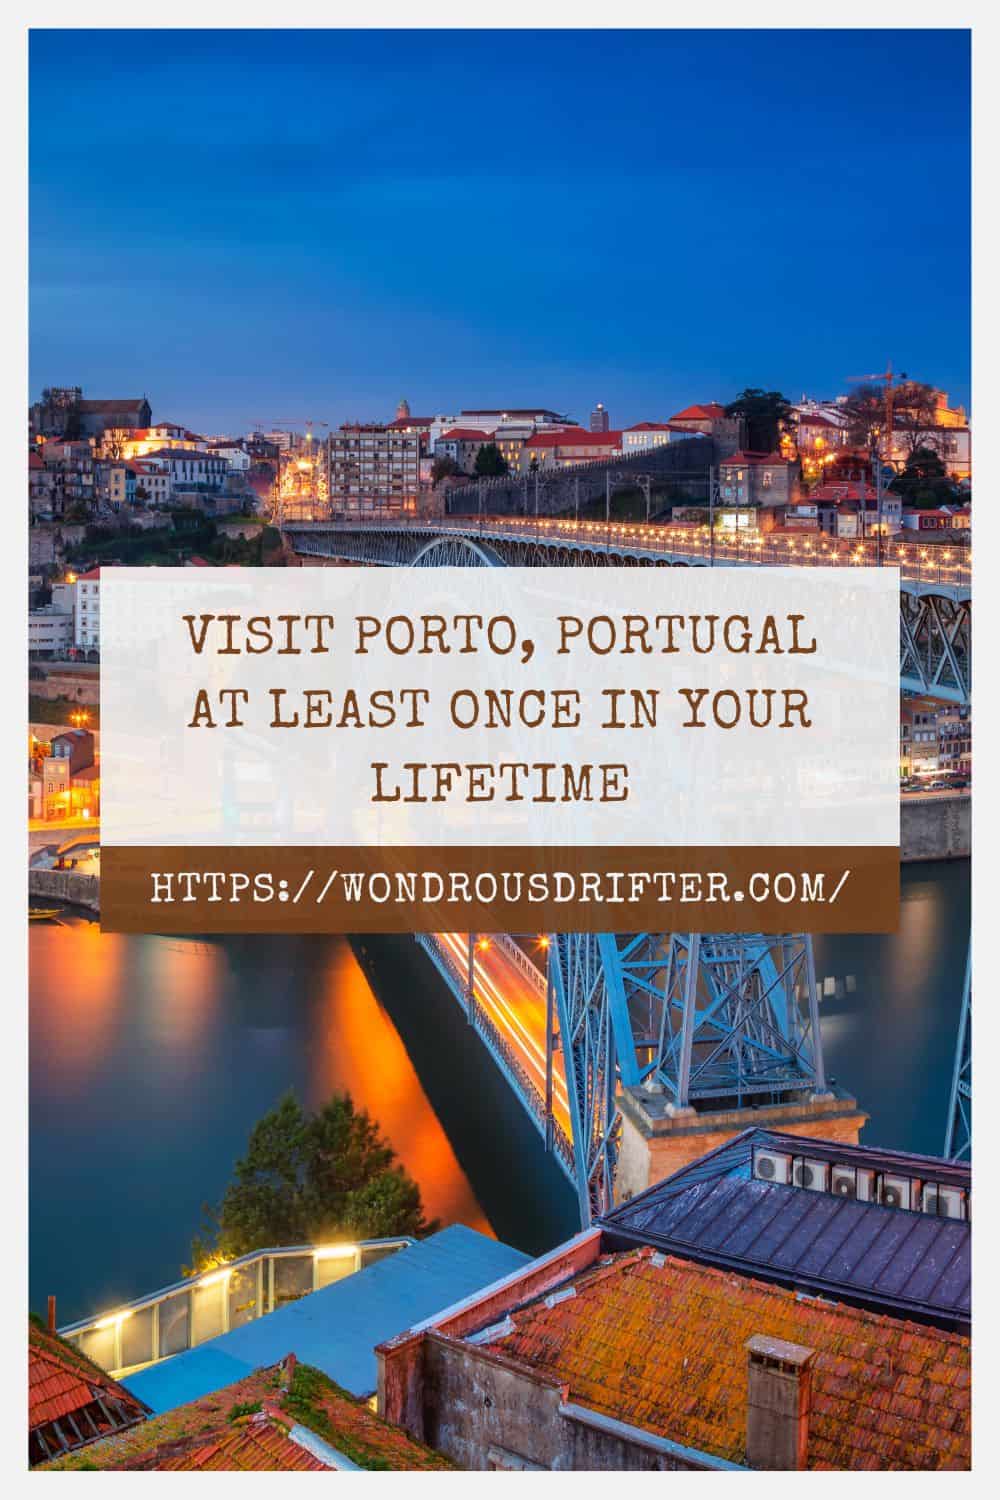 Visit Porto Portugal at least once in your lifetime